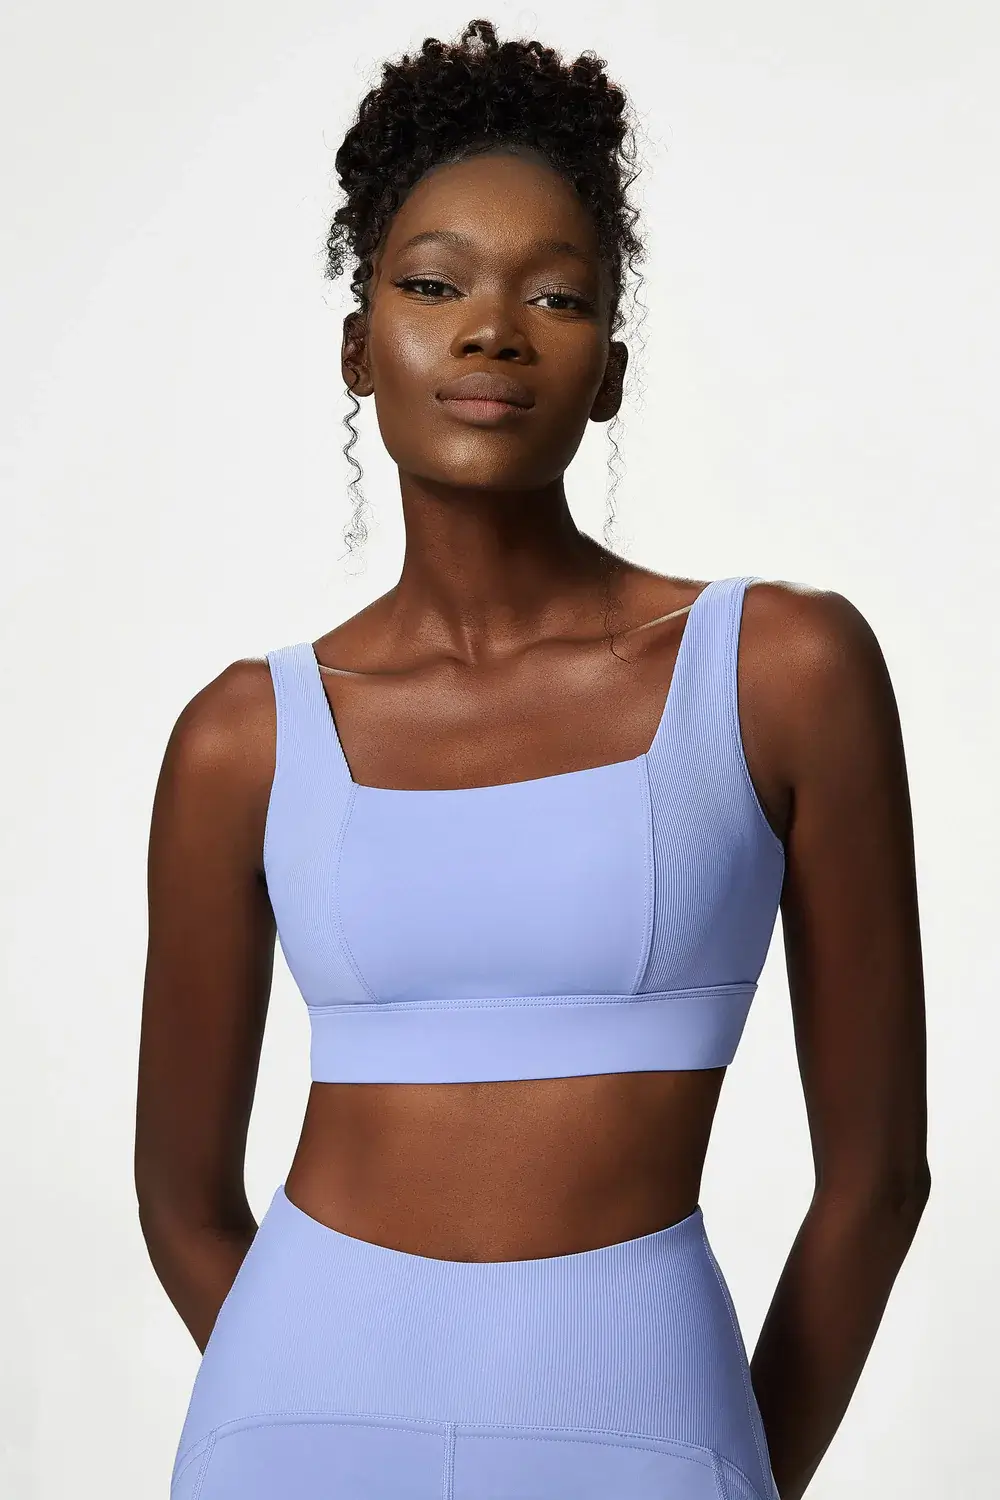 Why is it important to wear a good sports bra while riding? – SportsBra